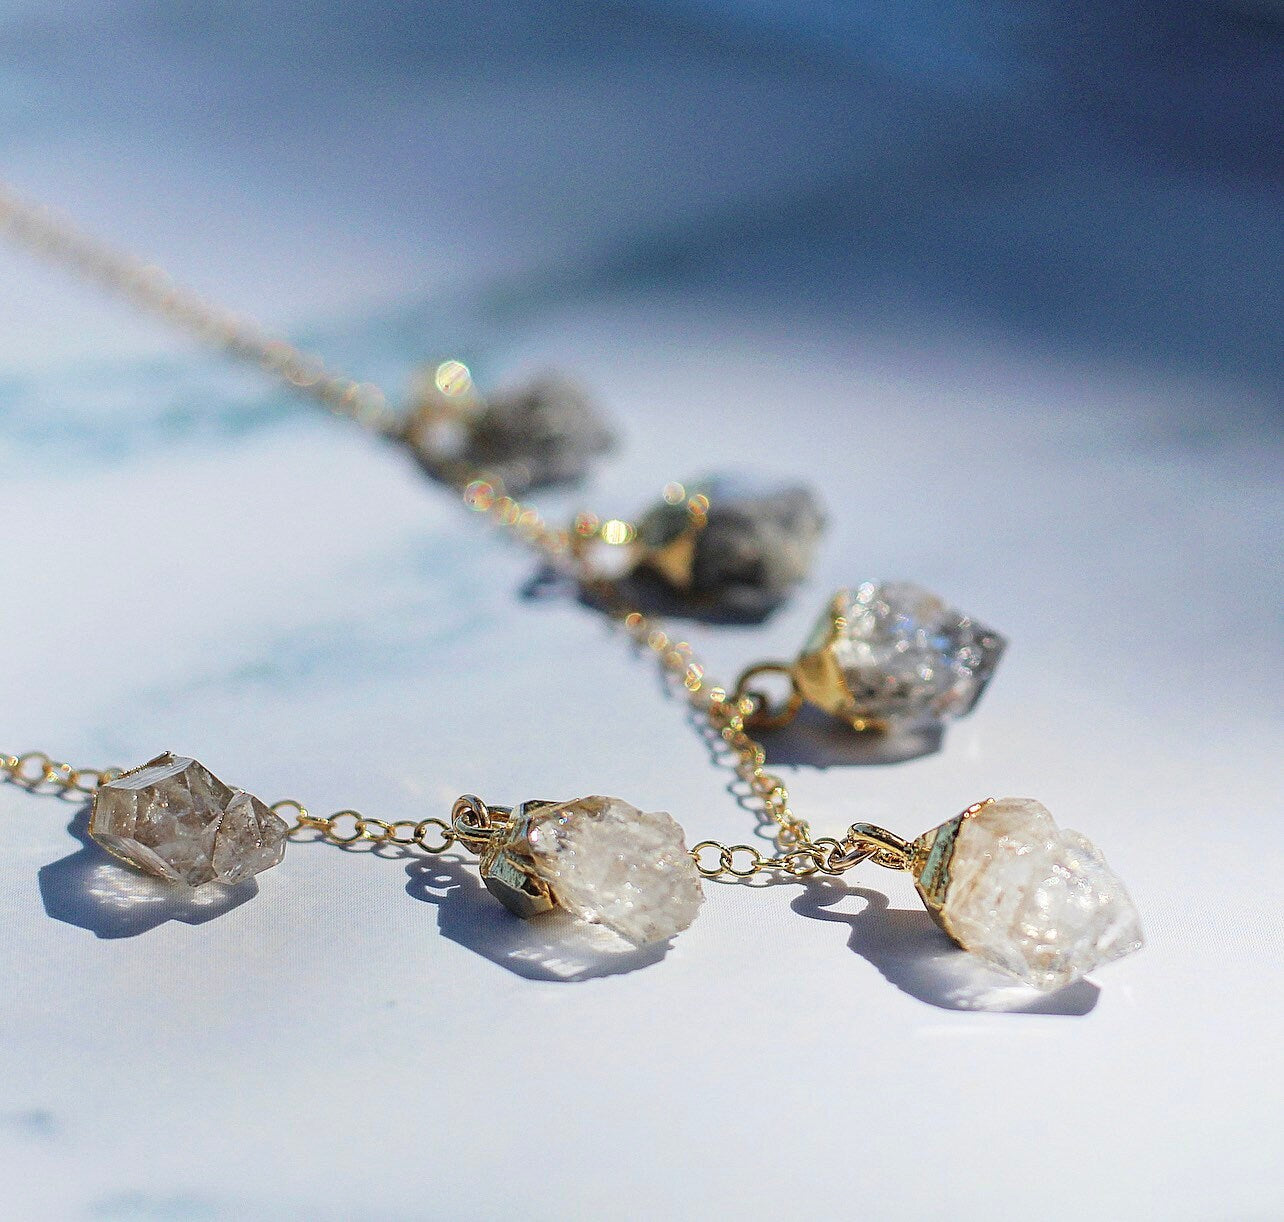 Raw Herkimer Diamond Necklace, Rough Crystal Necklace, Raw Herkimer Necklace, Crystal Necklace Gold Silver, Crown Chakra Necklace